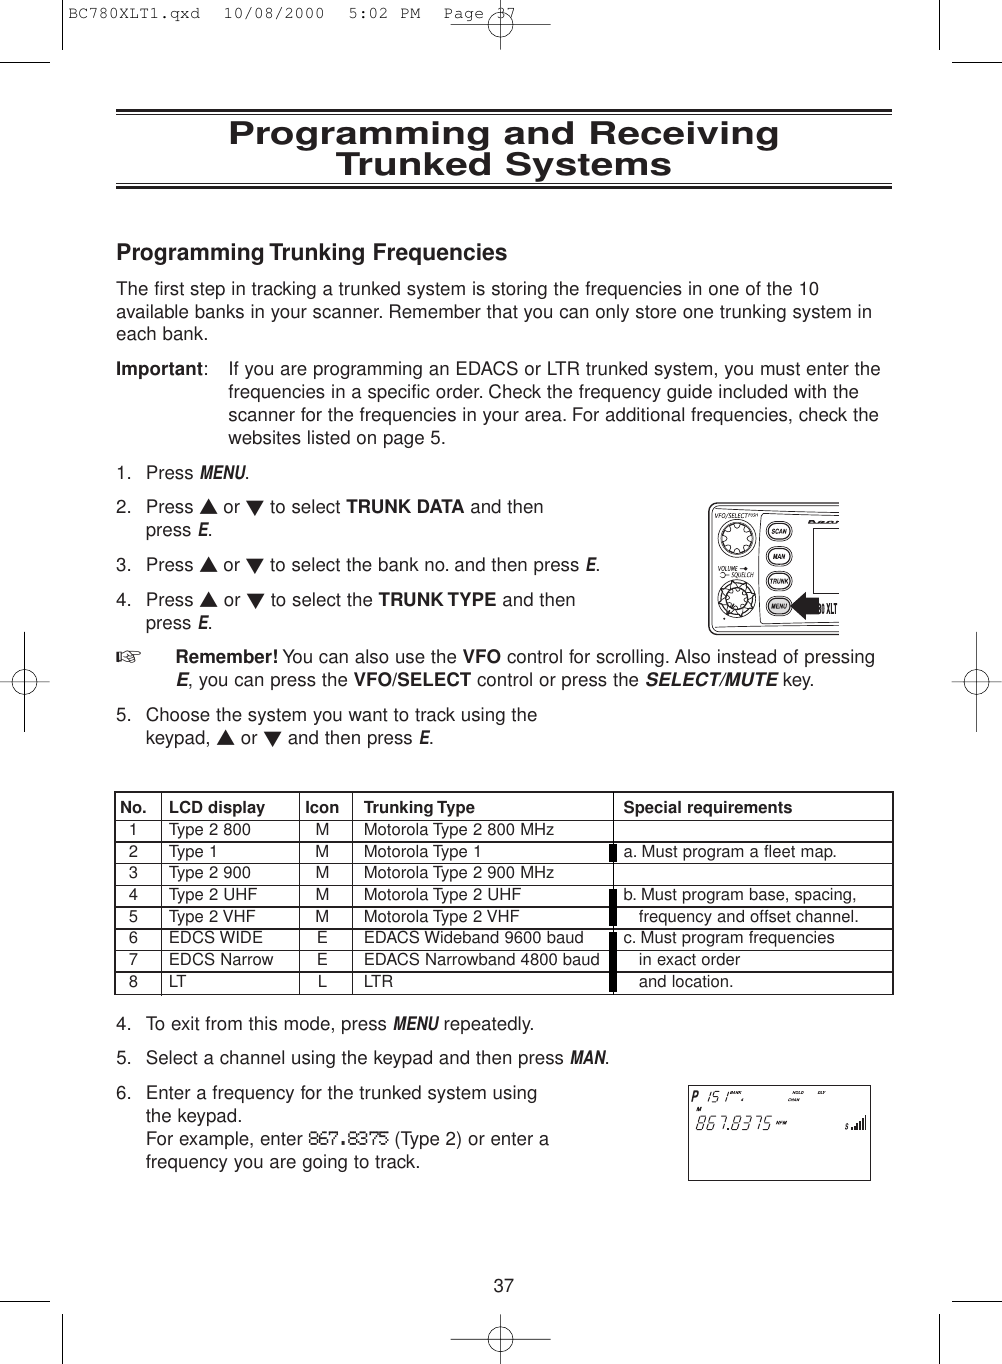 37Programming and Receiving Trunked SystemsProgramming Trunking FrequenciesThe first step in tracking a trunked system is storing the frequencies in one of the 10available banks in your scanner. Remember that you can only store one trunking system ineach bank.Important: If you are programming an EDACS or LTR trunked system, you must enter thefrequencies in a specific order. Check the frequency guide included with thescanner for the frequencies in your area. For additional frequencies, check thewebsites listed on page 5.1. Press MENU.2. Press ▲ or ▼to select TRUNK DATA and then press E.3. Press ▲ or ▼to select the bank no. and then press E.4. Press ▲or ▼to select the TRUNK TYPE and thenpress E.☞  Remember! You can also use the VFO control for scrolling. Also instead of pressingE, you can press the VFO/SELECT control or press the SELECT/MUTEkey.5. Choose the system you want to track using thekeypad, ▲or ▼and then press E.4. To exit from this mode, press MENUrepeatedly.5. Select a channel using the keypad and then press MAN.6. Enter a frequency for the trunked system using the keypad.For example, enter 867.8375(Type 2) or enter afrequency you are going to track.No. LCD display Icon Trunking Type Special requirements1 Type 2 800 M Motorola Type 2 800 MHz2 Type 1 M Motorola Type 1 a. Must program a fleet map.3 Type 2 900 M Motorola Type 2 900 MHz4 Type 2 UHF M Motorola Type 2 UHF b. Must program base, spacing,5 Type 2 VHF M Motorola Type 2 VHF frequency and offset channel.6 EDCS WIDE E EDACS Wideband 9600 baud c. Must program frequencies7 EDCS Narrow E EDACS Narrowband 4800 baud in exact order 8 LT L LTR and location.BC780XLT1.qxd  10/08/2000  5:02 PM  Page 37